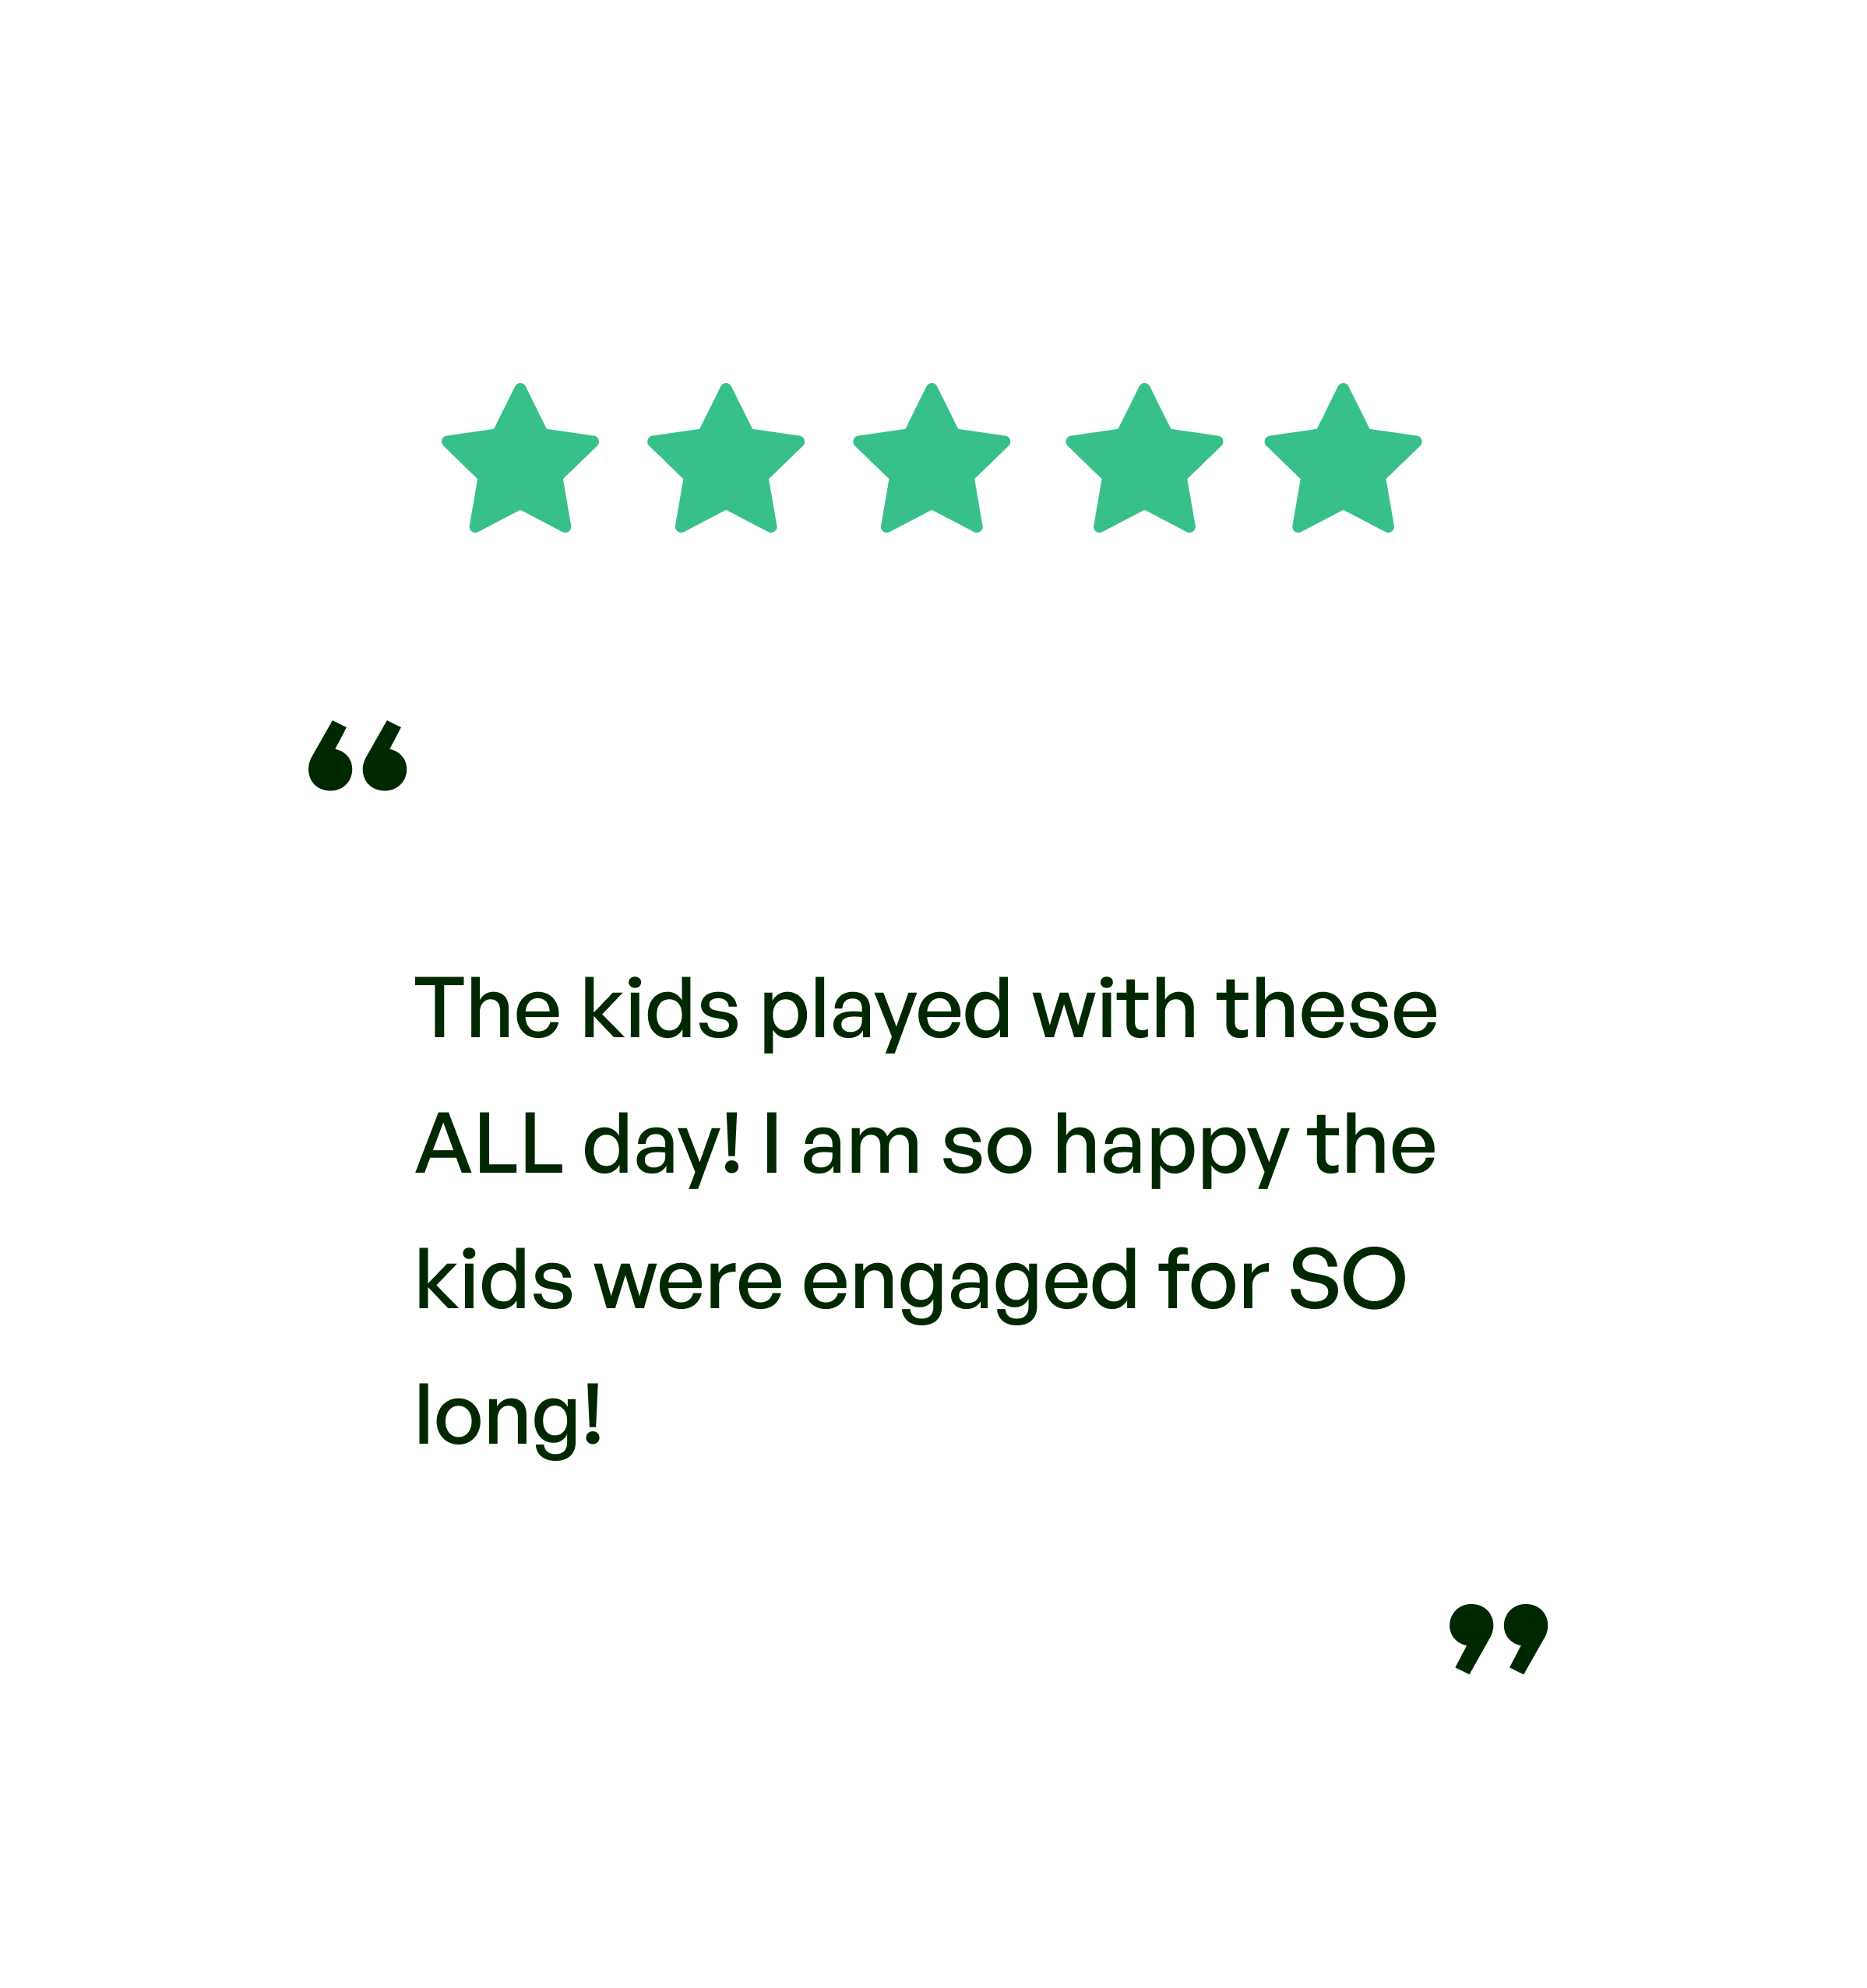 Five stars. Testimonial: The kids played with these ALL day. I am so happy the kids were engaged for SO long!